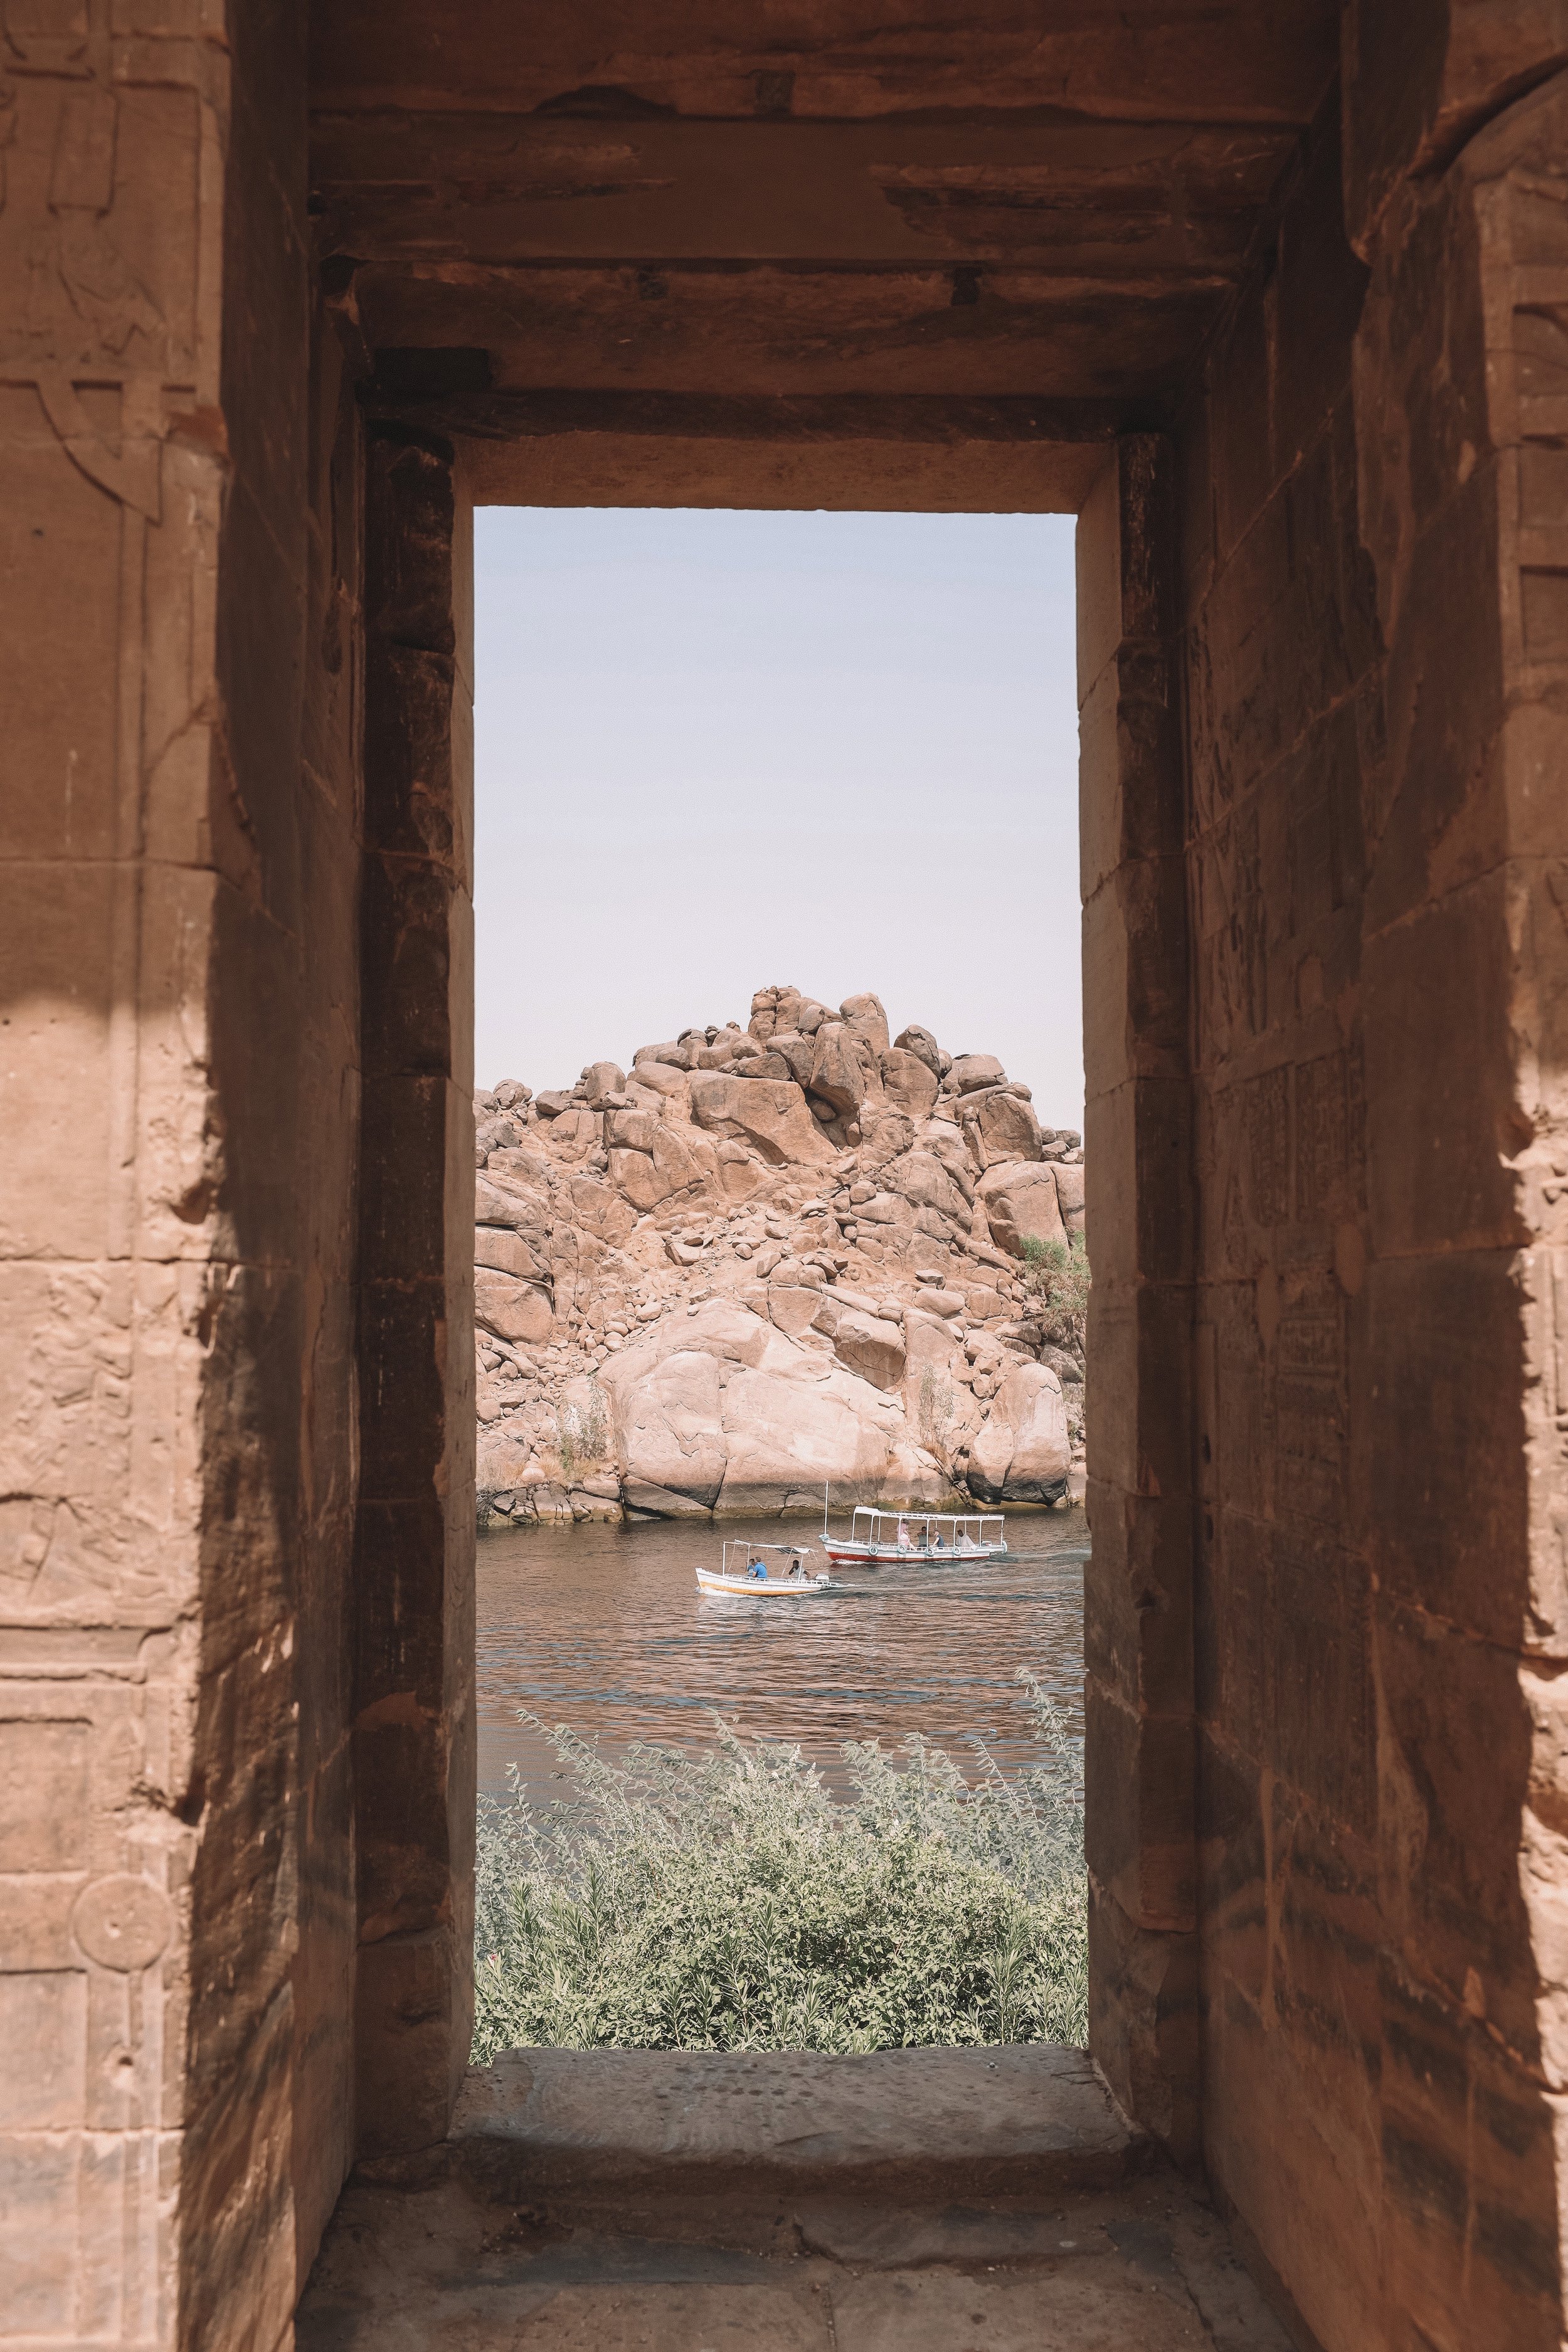 View on the Nile River through a window - Philae Temple - Aswan - Egypt